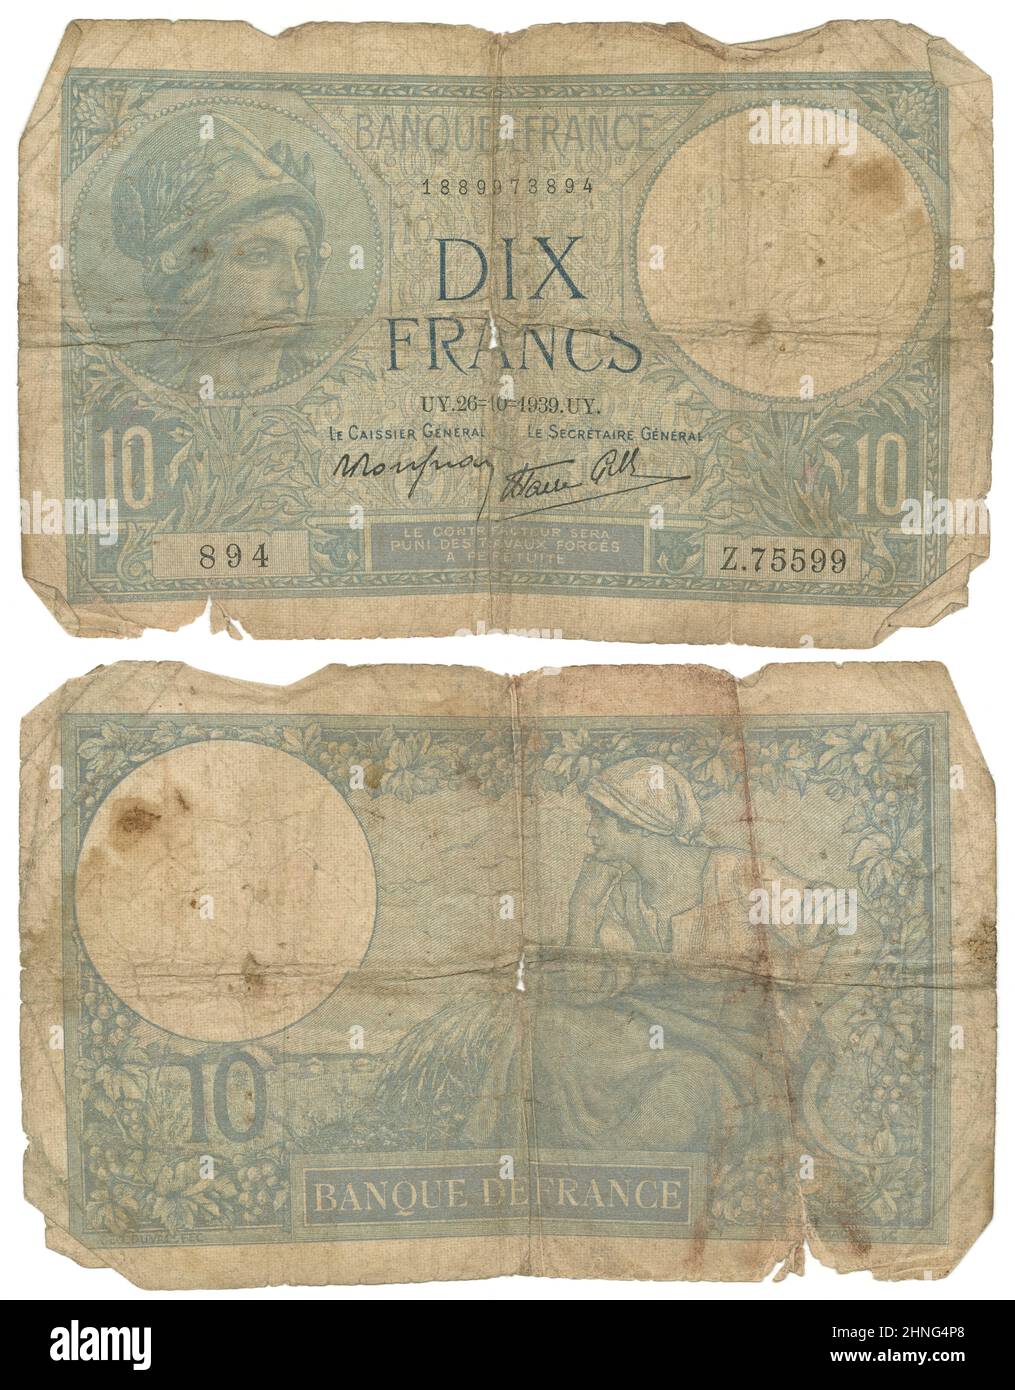 1939, Ten Francs note, France, obverse and reverse. Actual size: 137mm x 86mm. Stock Photo